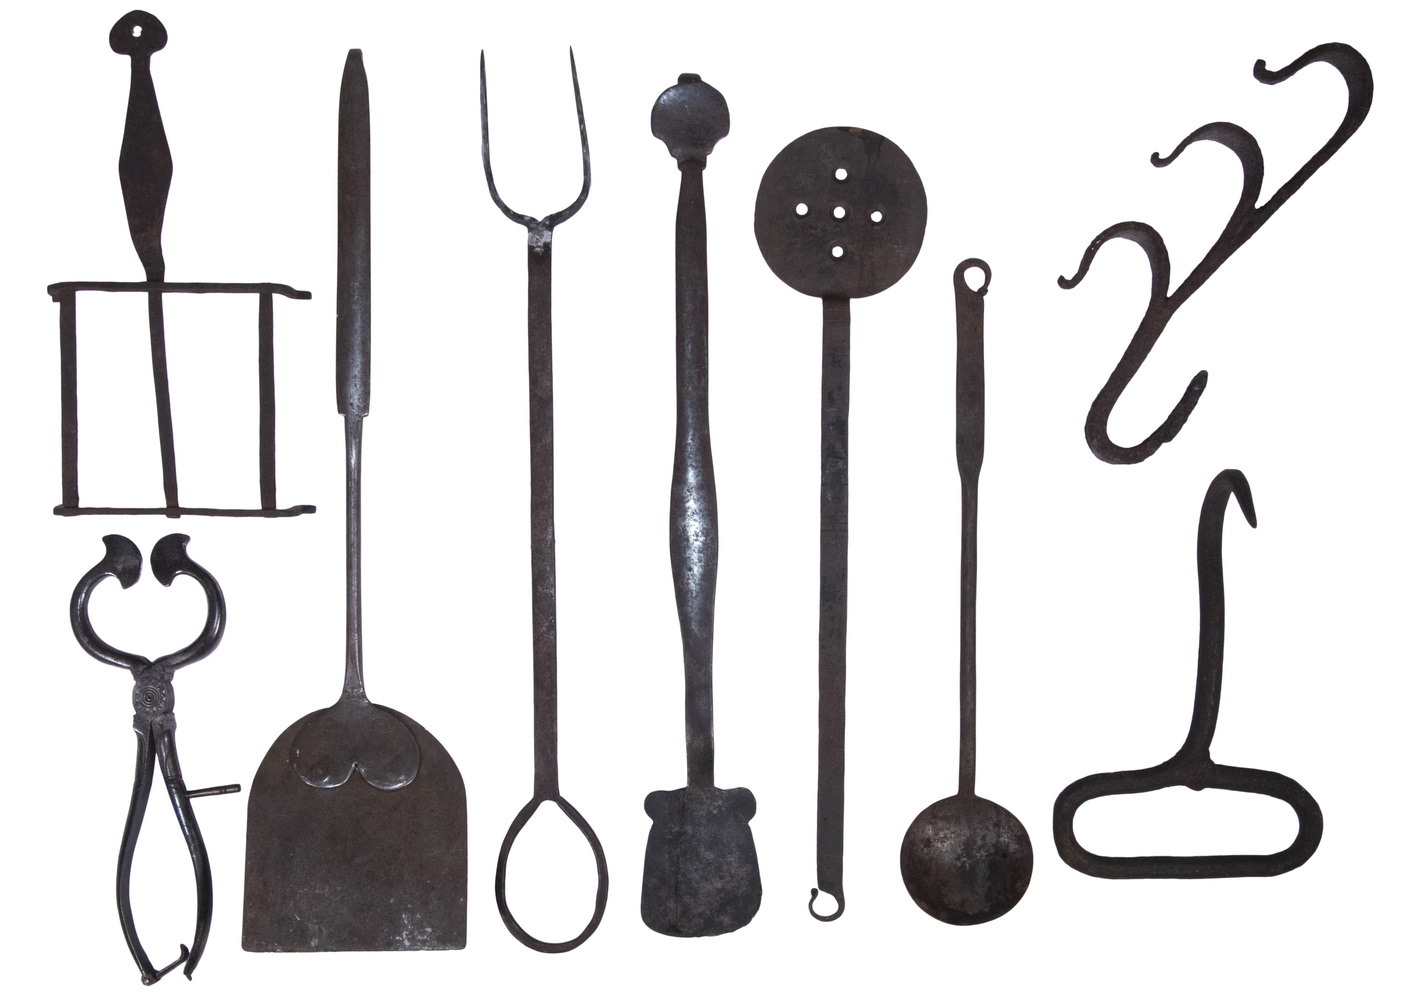 EARLY IRON COOKING TOOLS (9) 18th